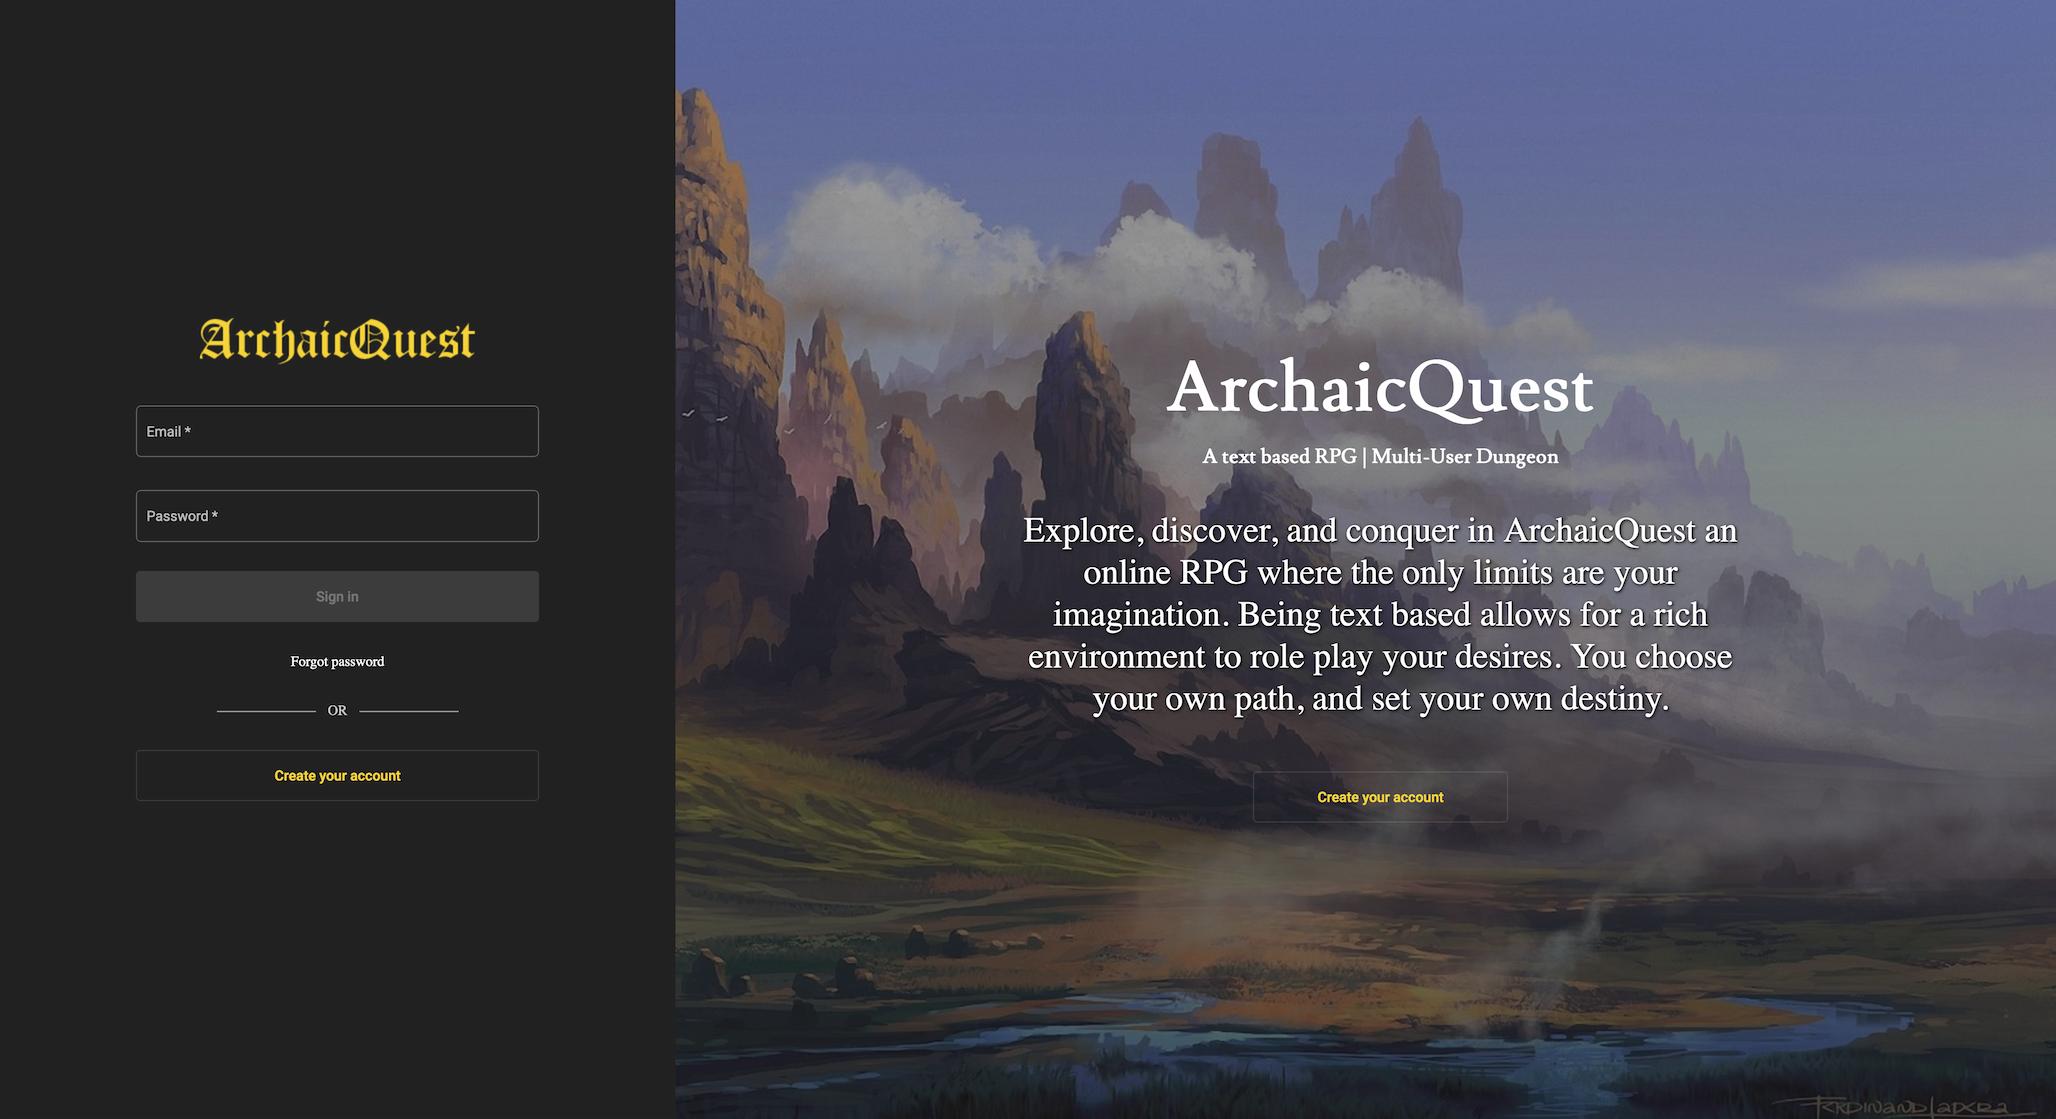 ArchaicQuest game client for Multi-User-Dungeon (MUD) game